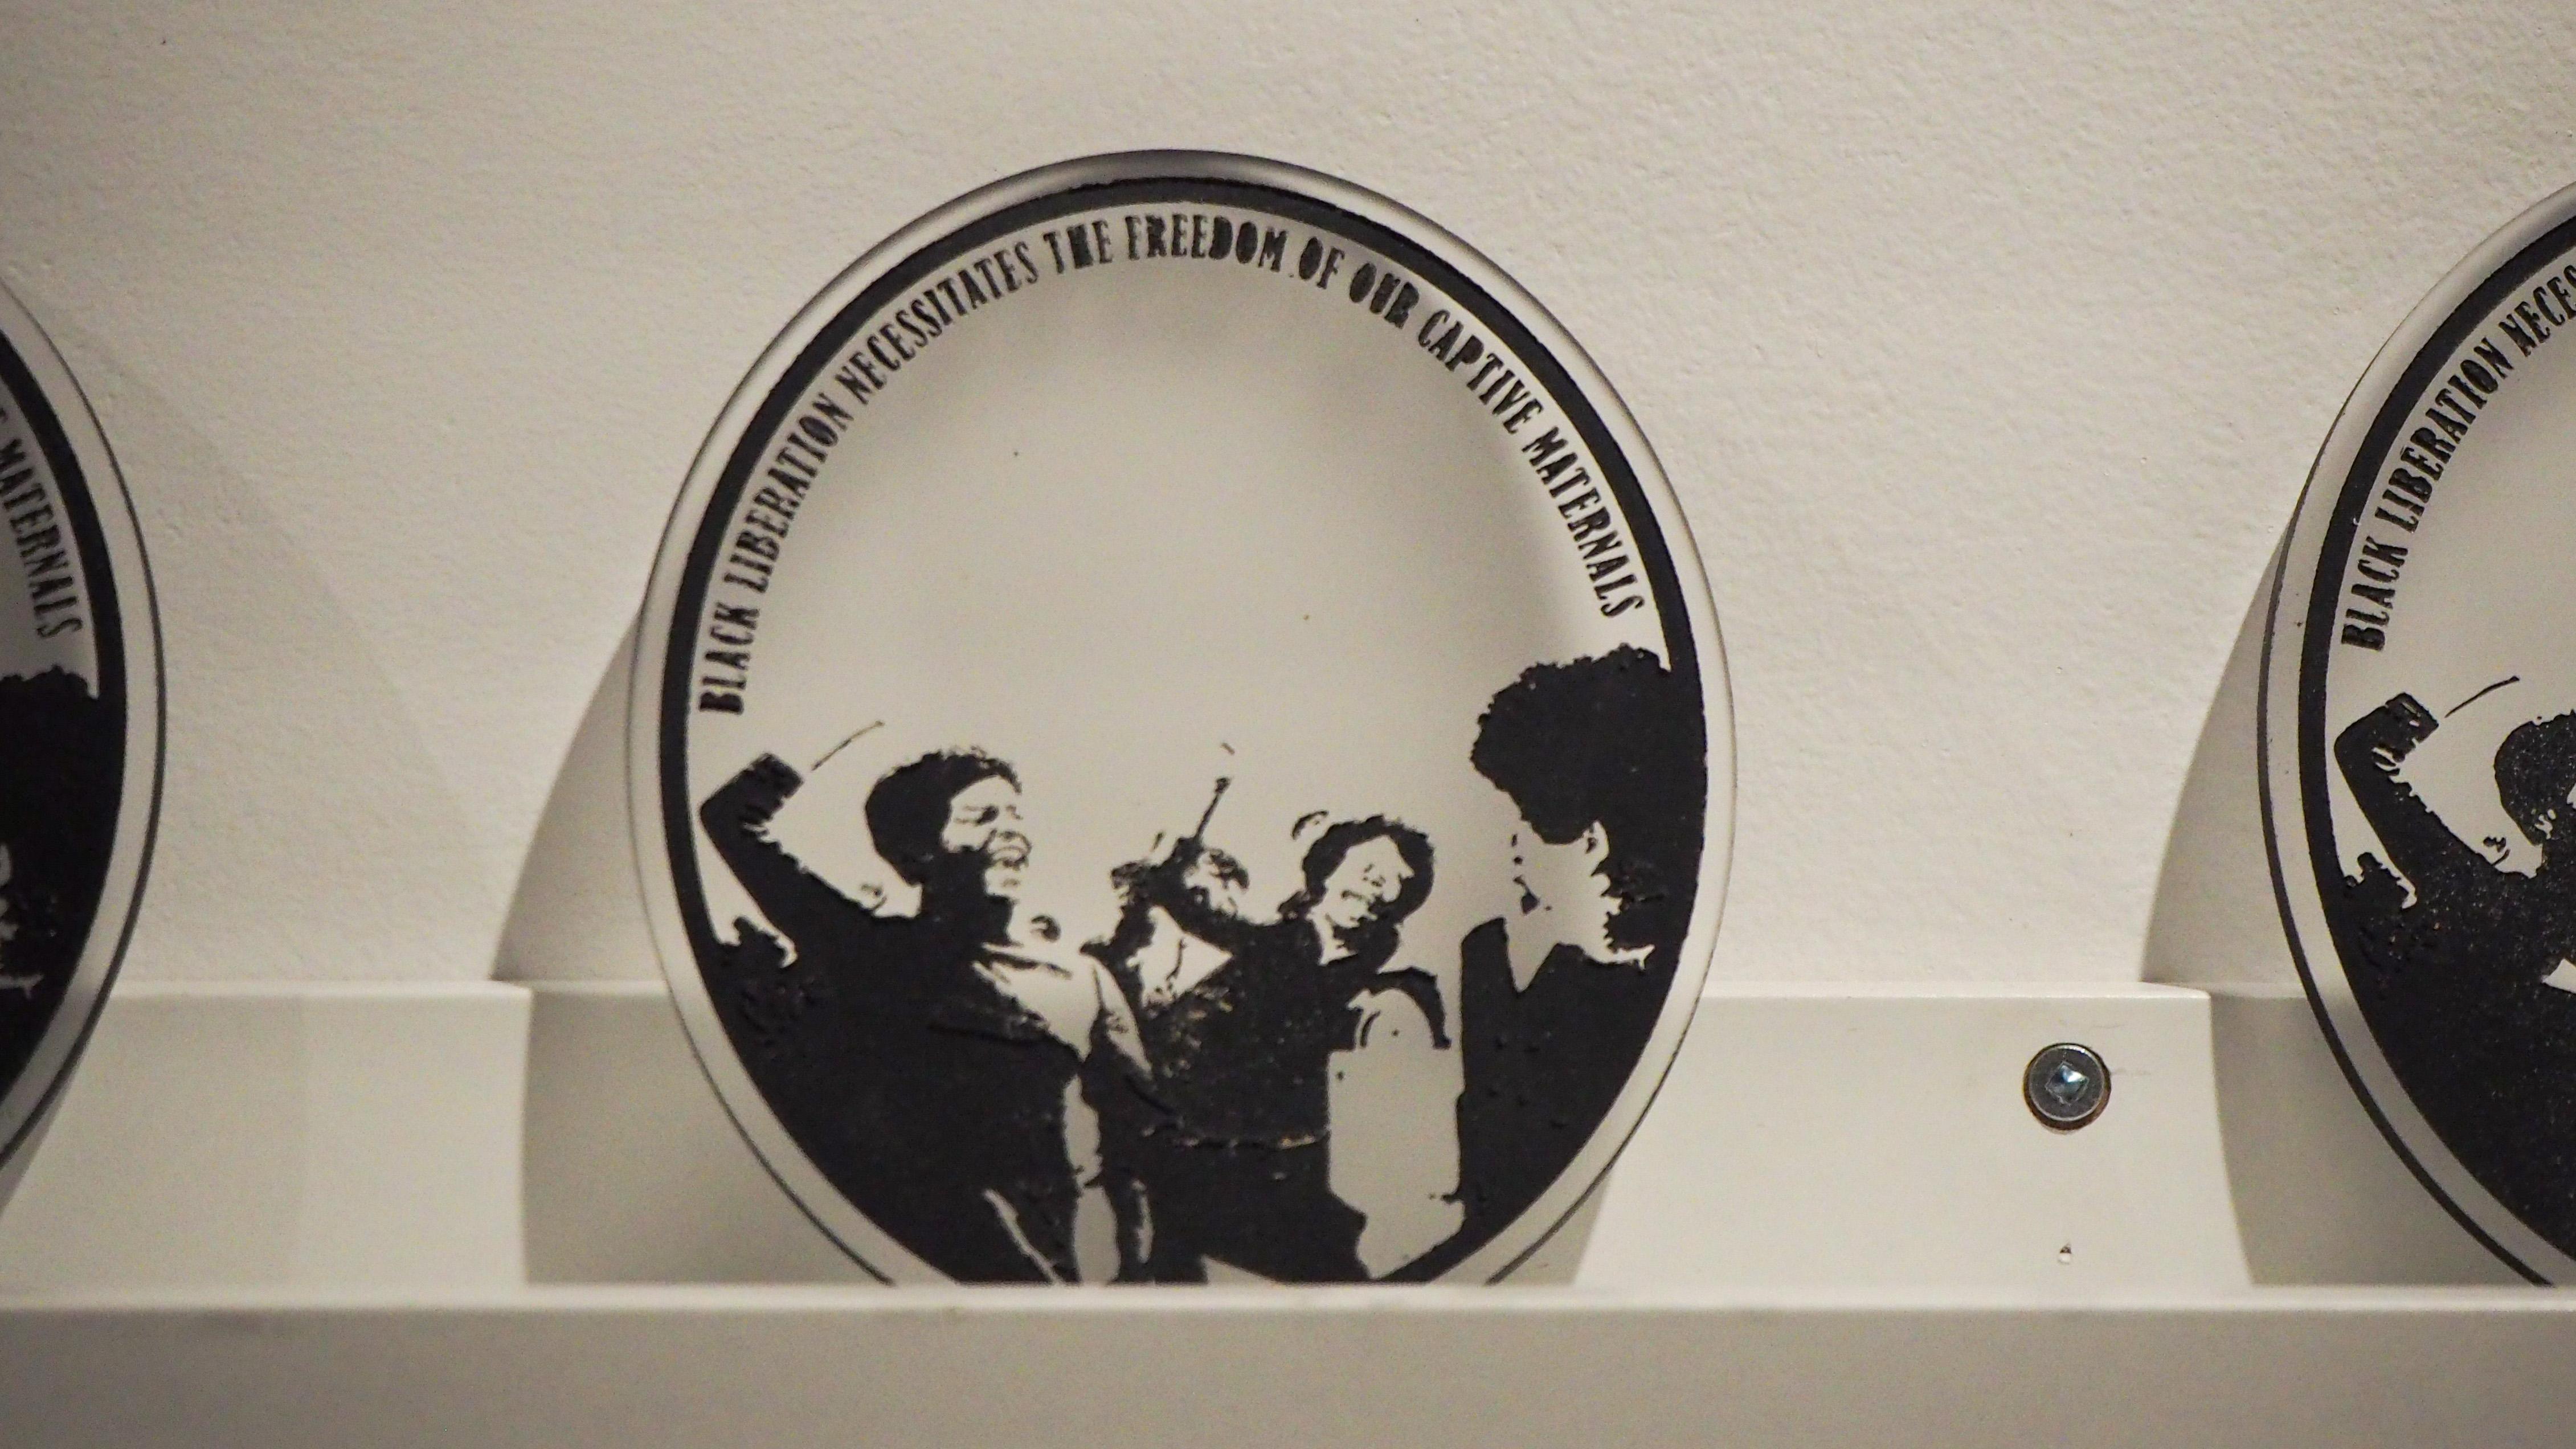 A medallion with a black-and-white photo of Black women and text that reads "Black liberation necessitates the freedom of our captive materials"